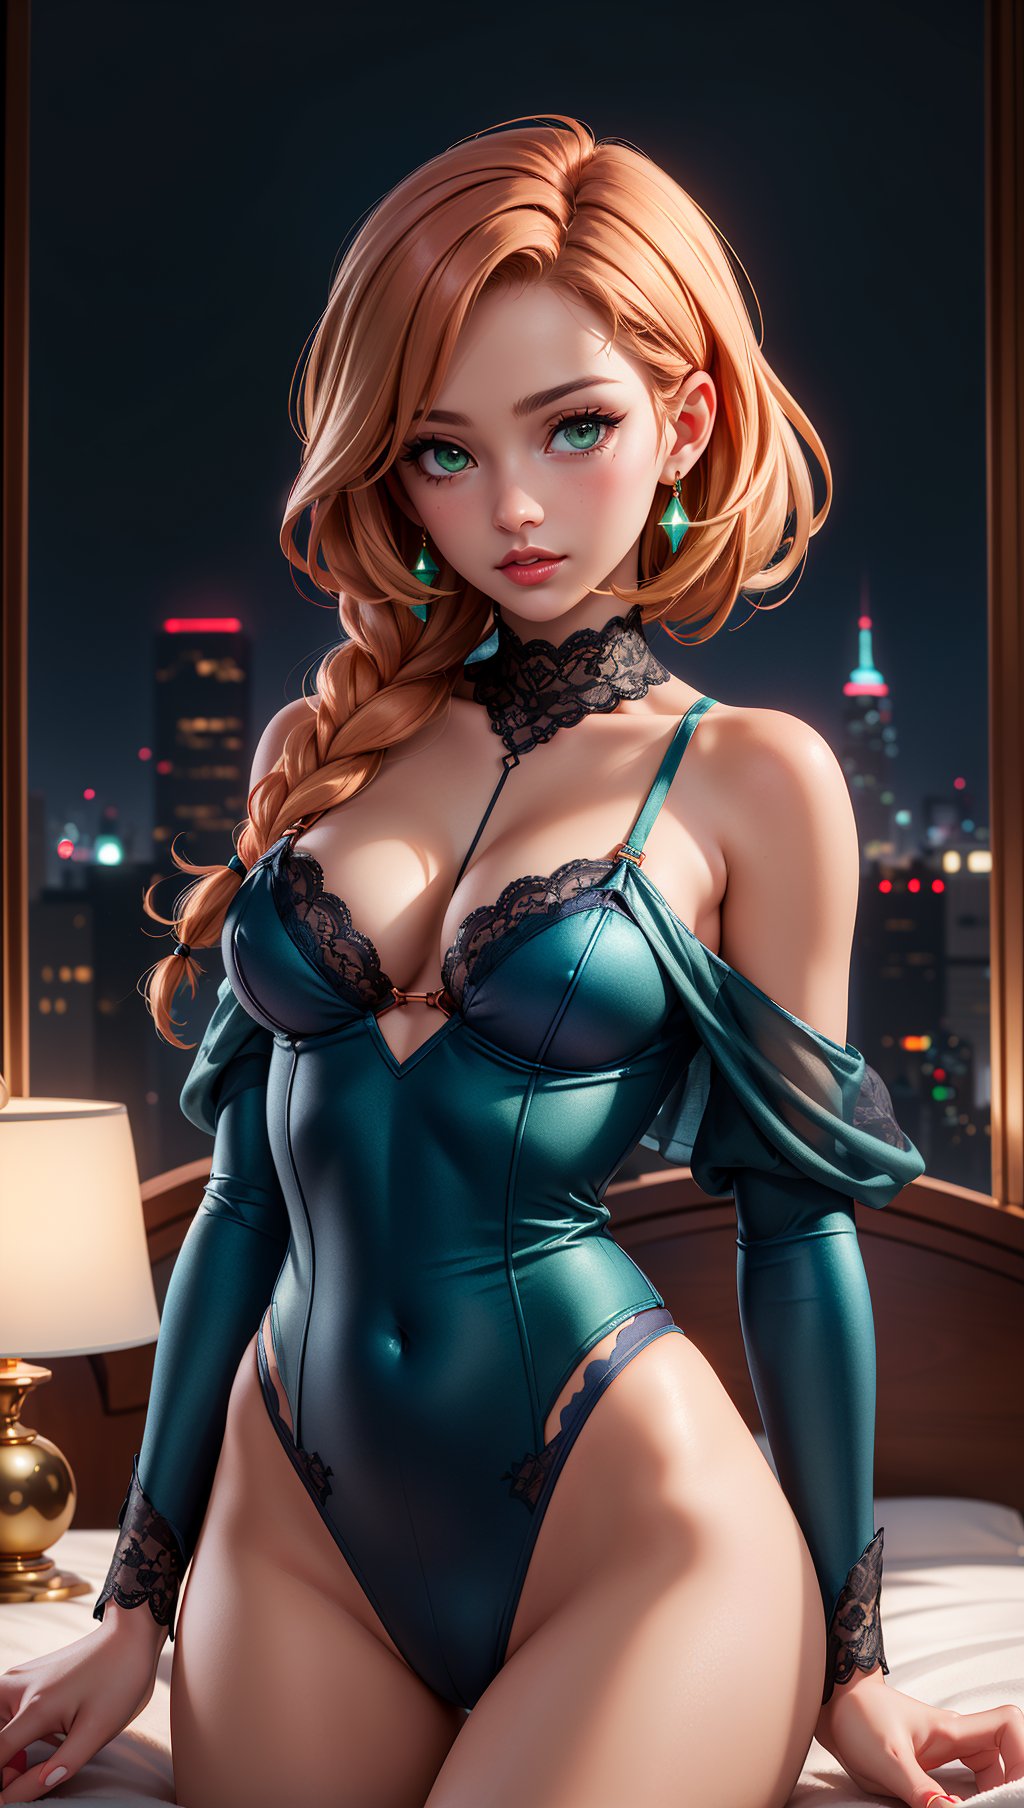 (masterpiece,best quality,highres:1.3),(official art,beautiful and aesthetic:1.2),(full shot:1.2),(1girl,solo,masterpiece,8k,HDR,),character concept art of a beautiful woman leaning over,((wearing Navy blue Sheer Teddy with Lace Trim,straps falling off her shoulder)),seductive,luscious lips,comic book art,rough colored sketch,(hourglass body,square shaped face,green eyes,full lips,high cheekbones),(copper red fishtail braid hair:1.2),small breasts,toned thighs,thigh gap,looking at the viewer),(luxurious modern bedroom,bokeh),